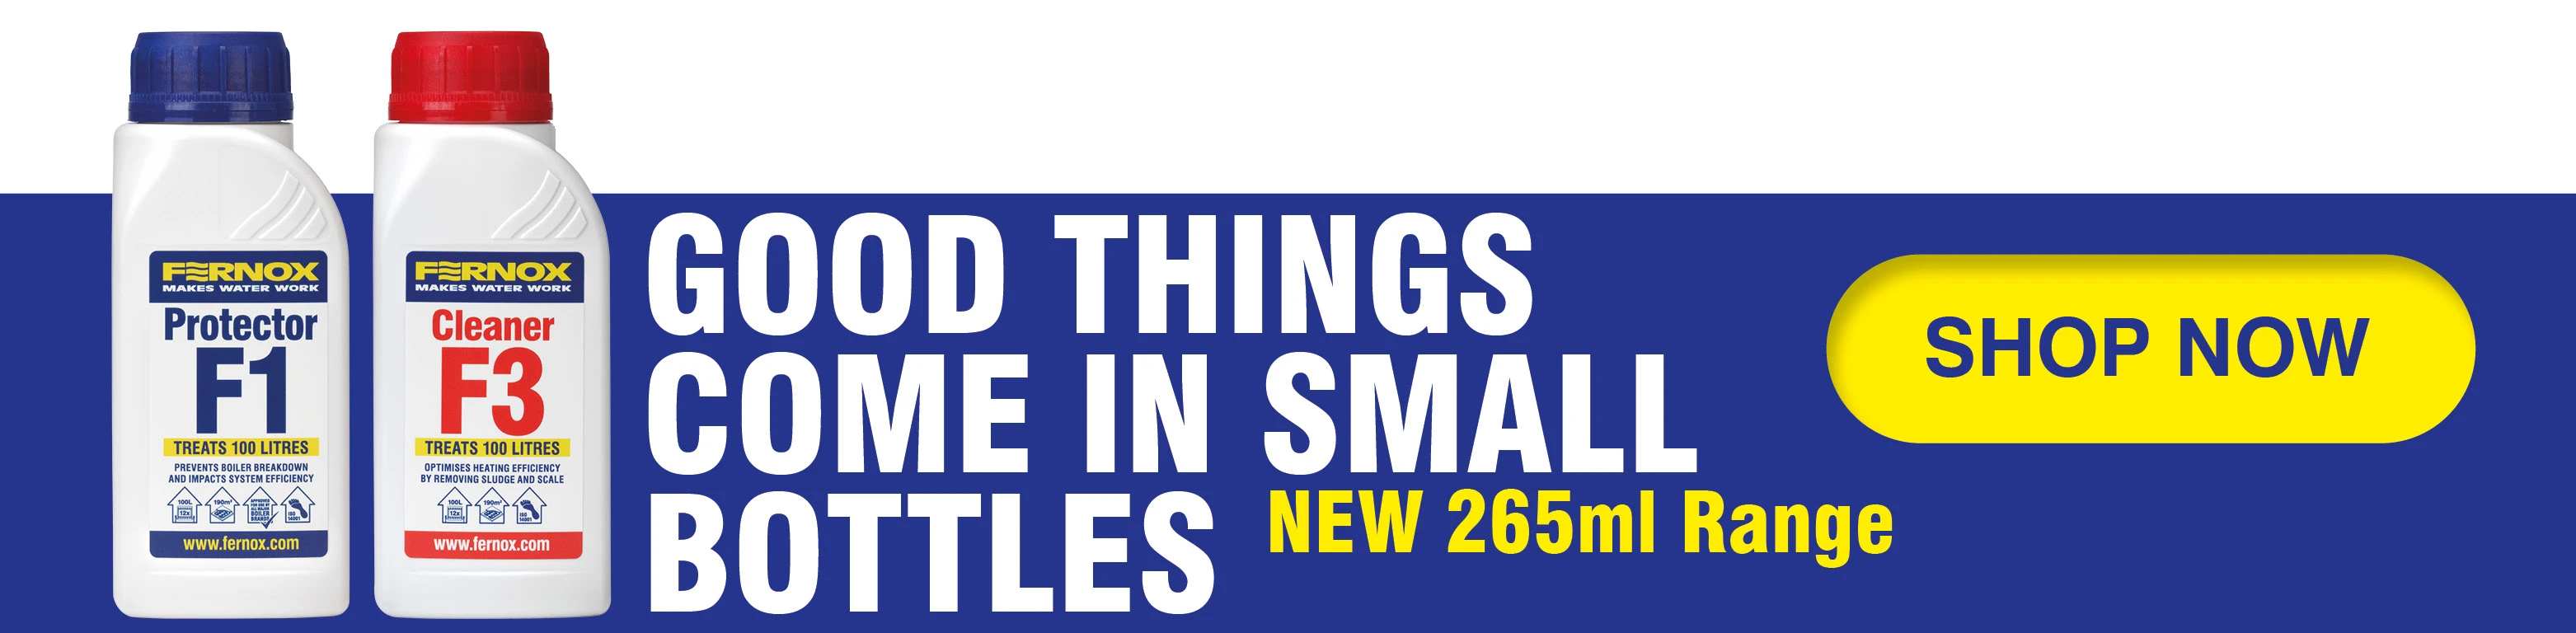 Fernox banner image - Good things come in small bottles